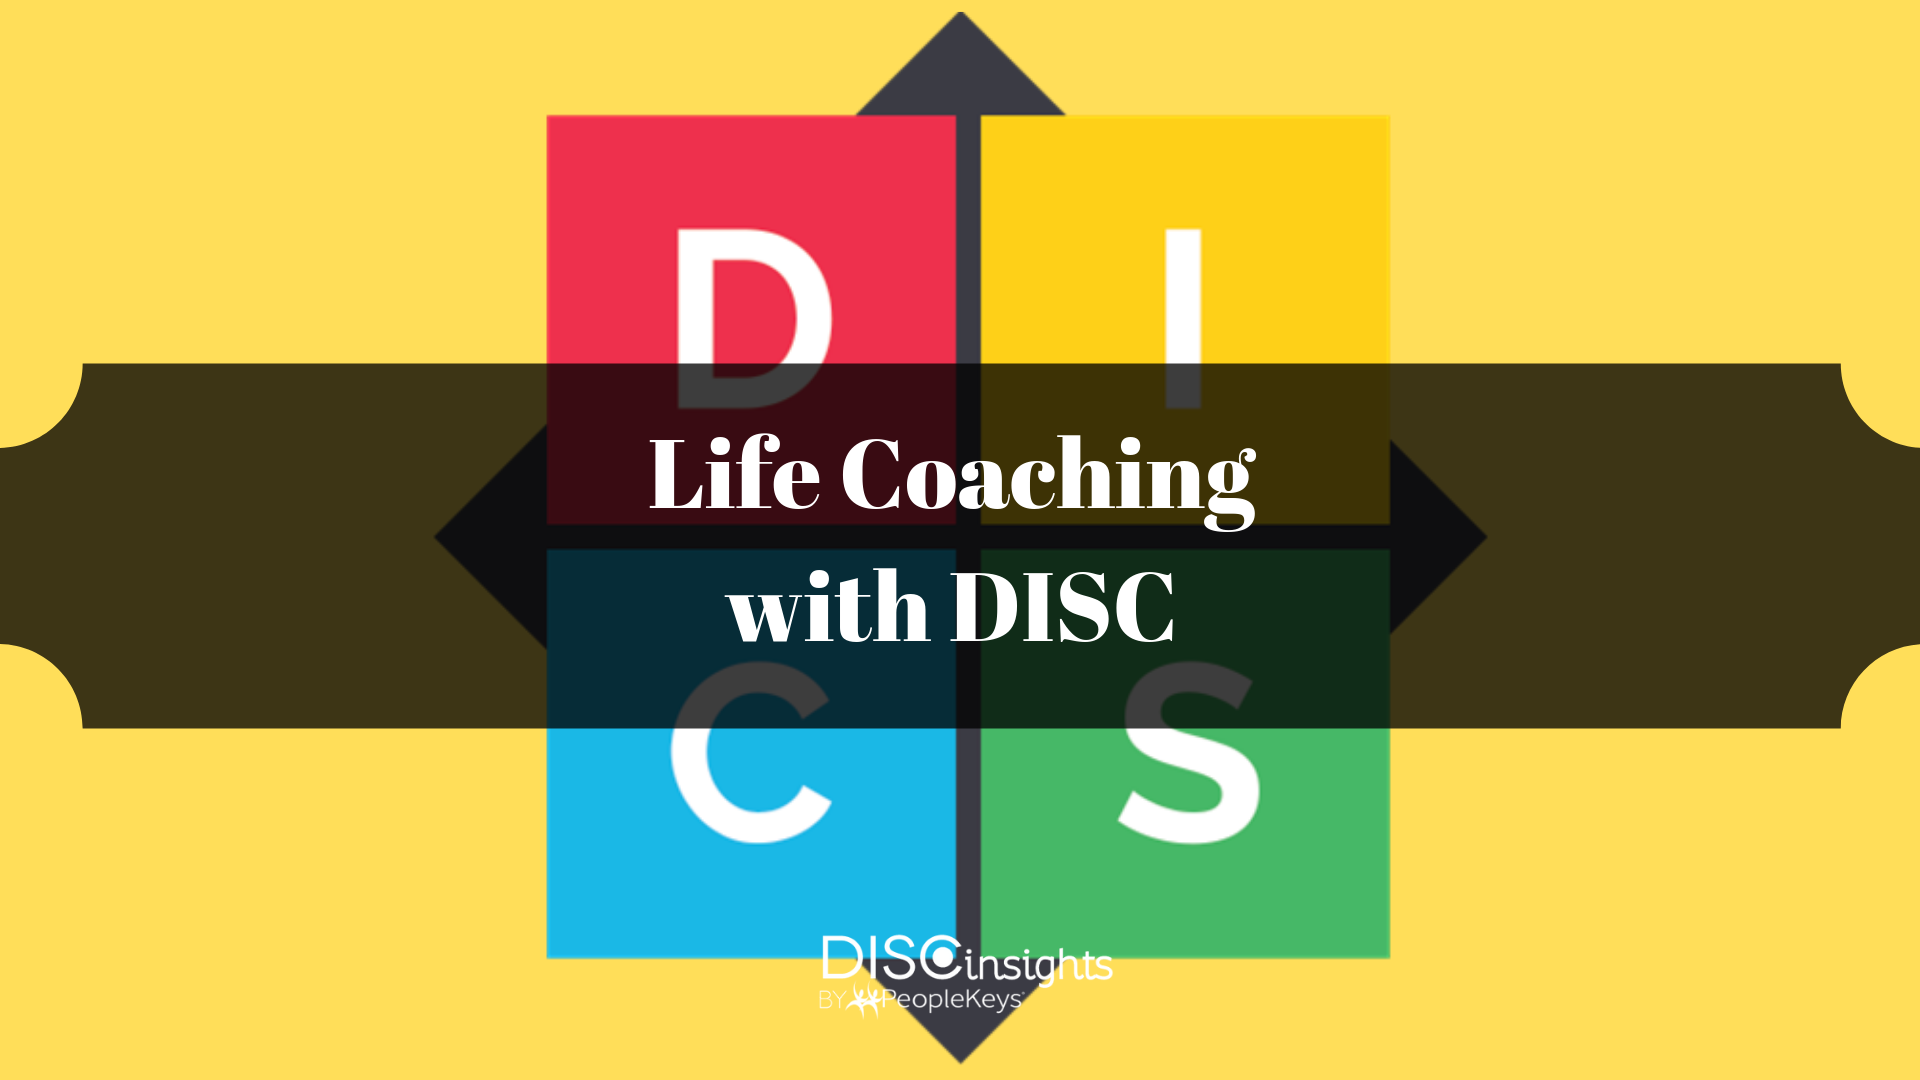 Life Coaching with DISC